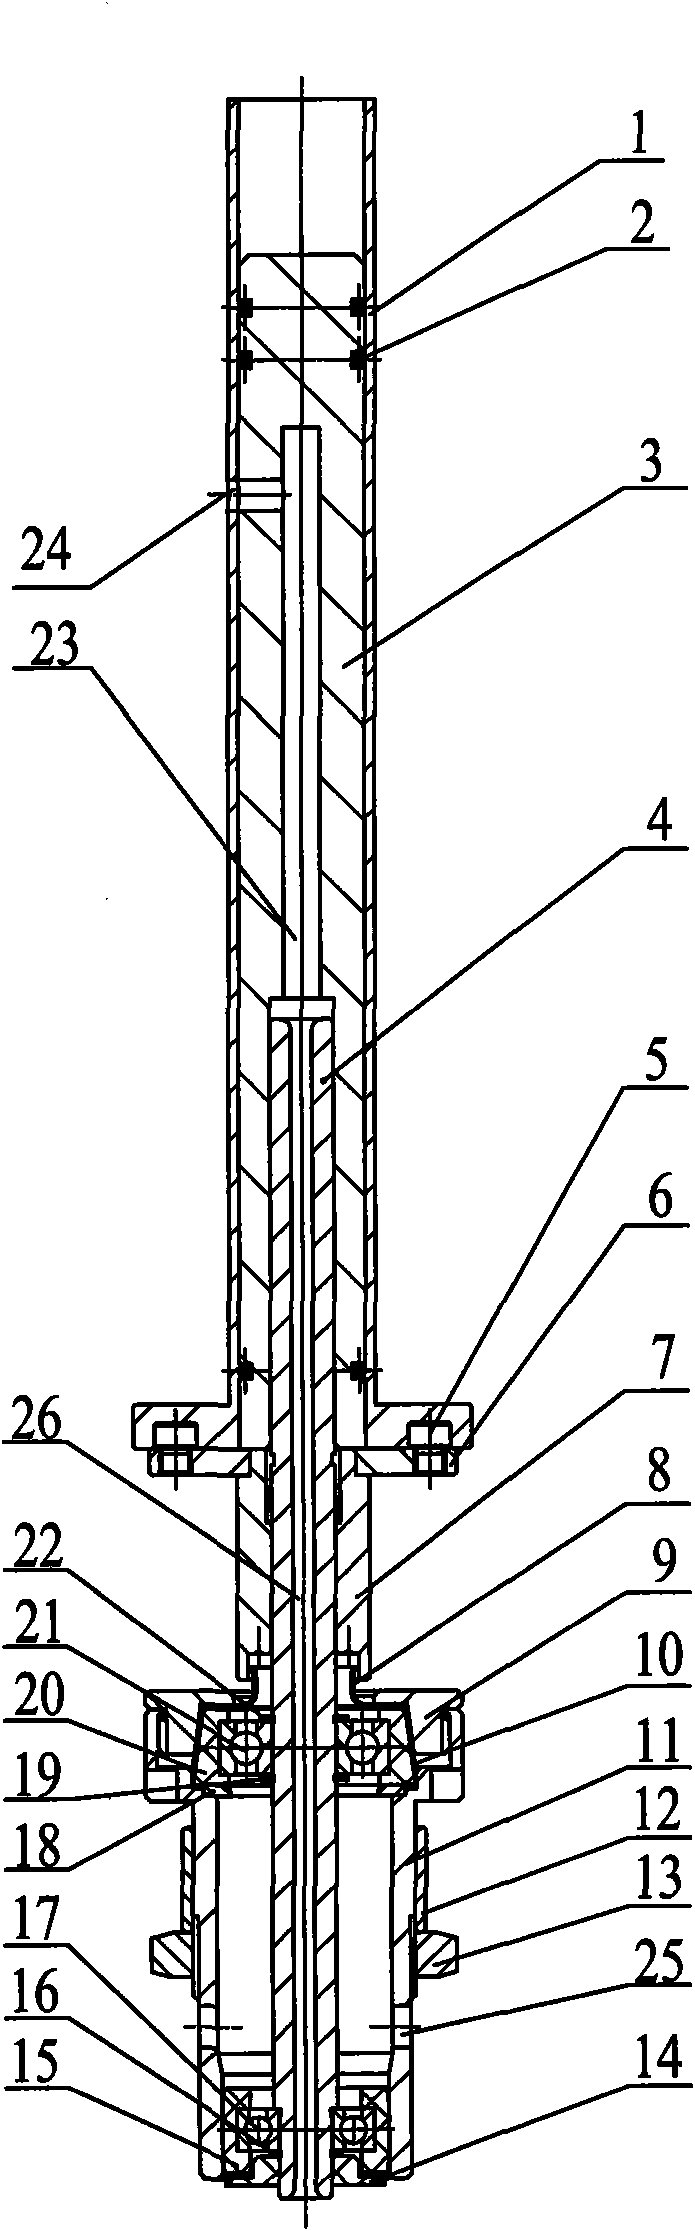 High-speed wire twisting spindle